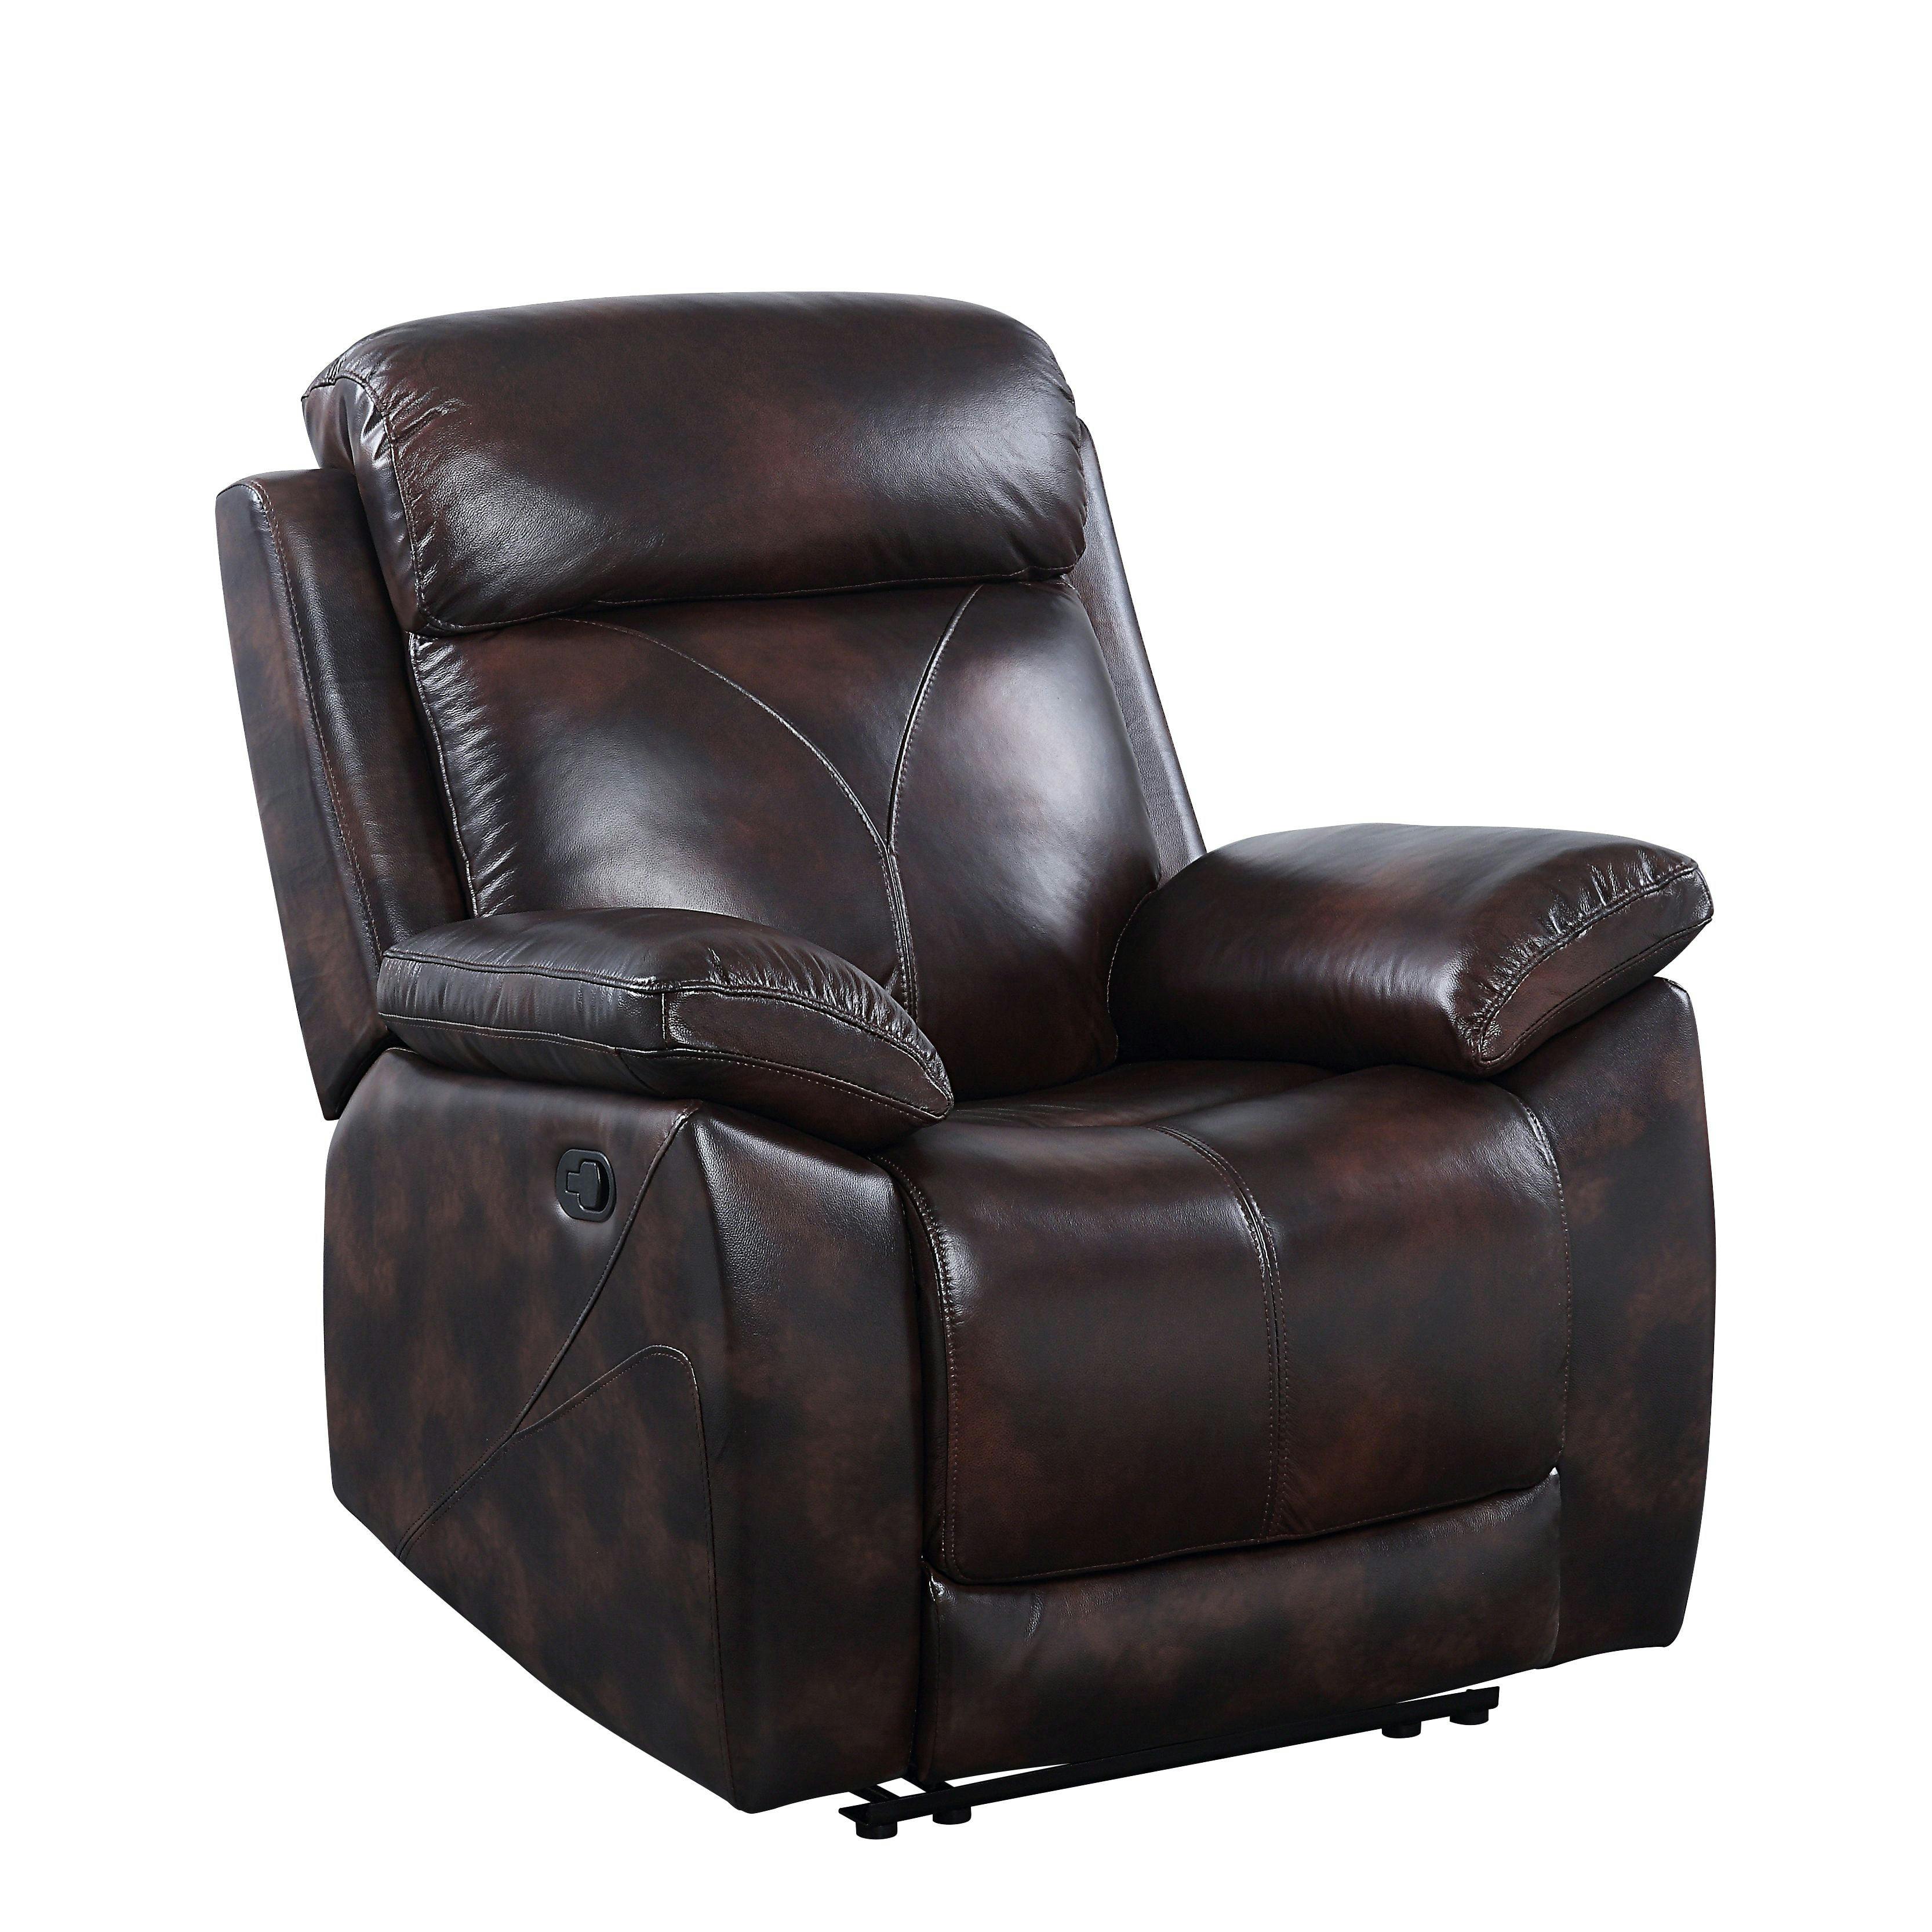 Perfiel Dark Brown Top Grain Leather Manual Recliner with Wood Accents